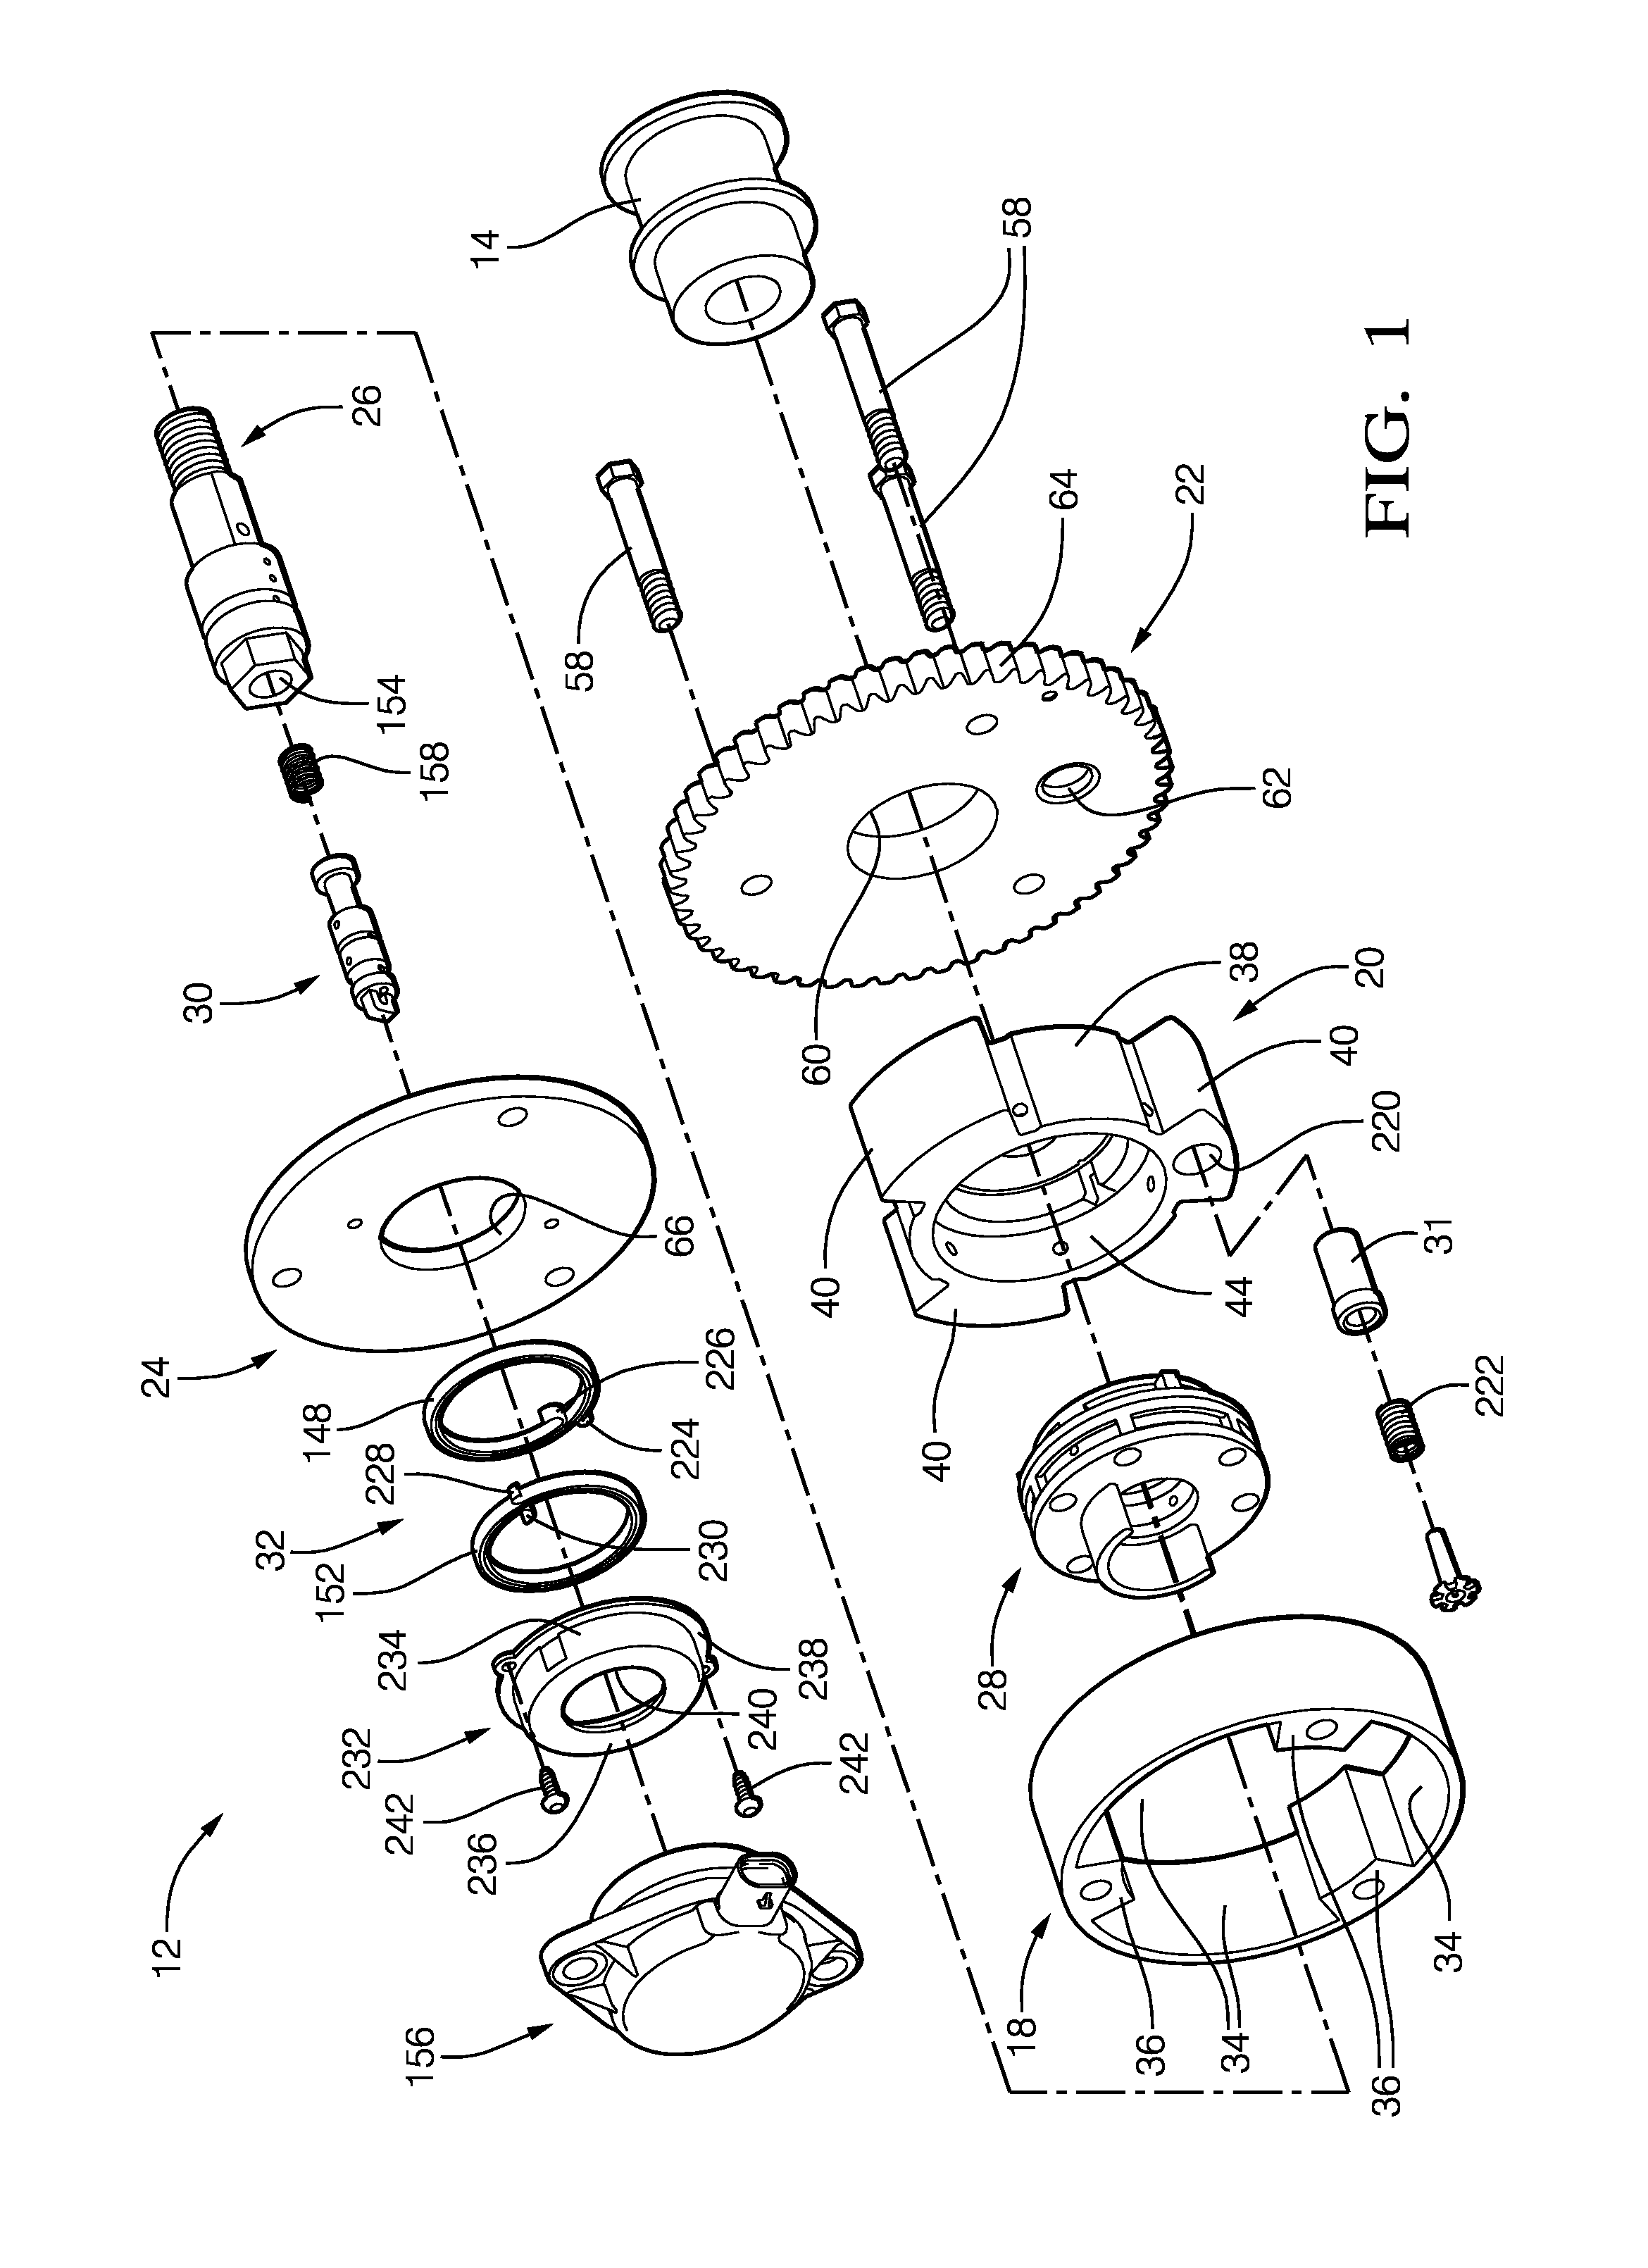 Camshaft phaser with a rotary valve spool positioned hydraulically